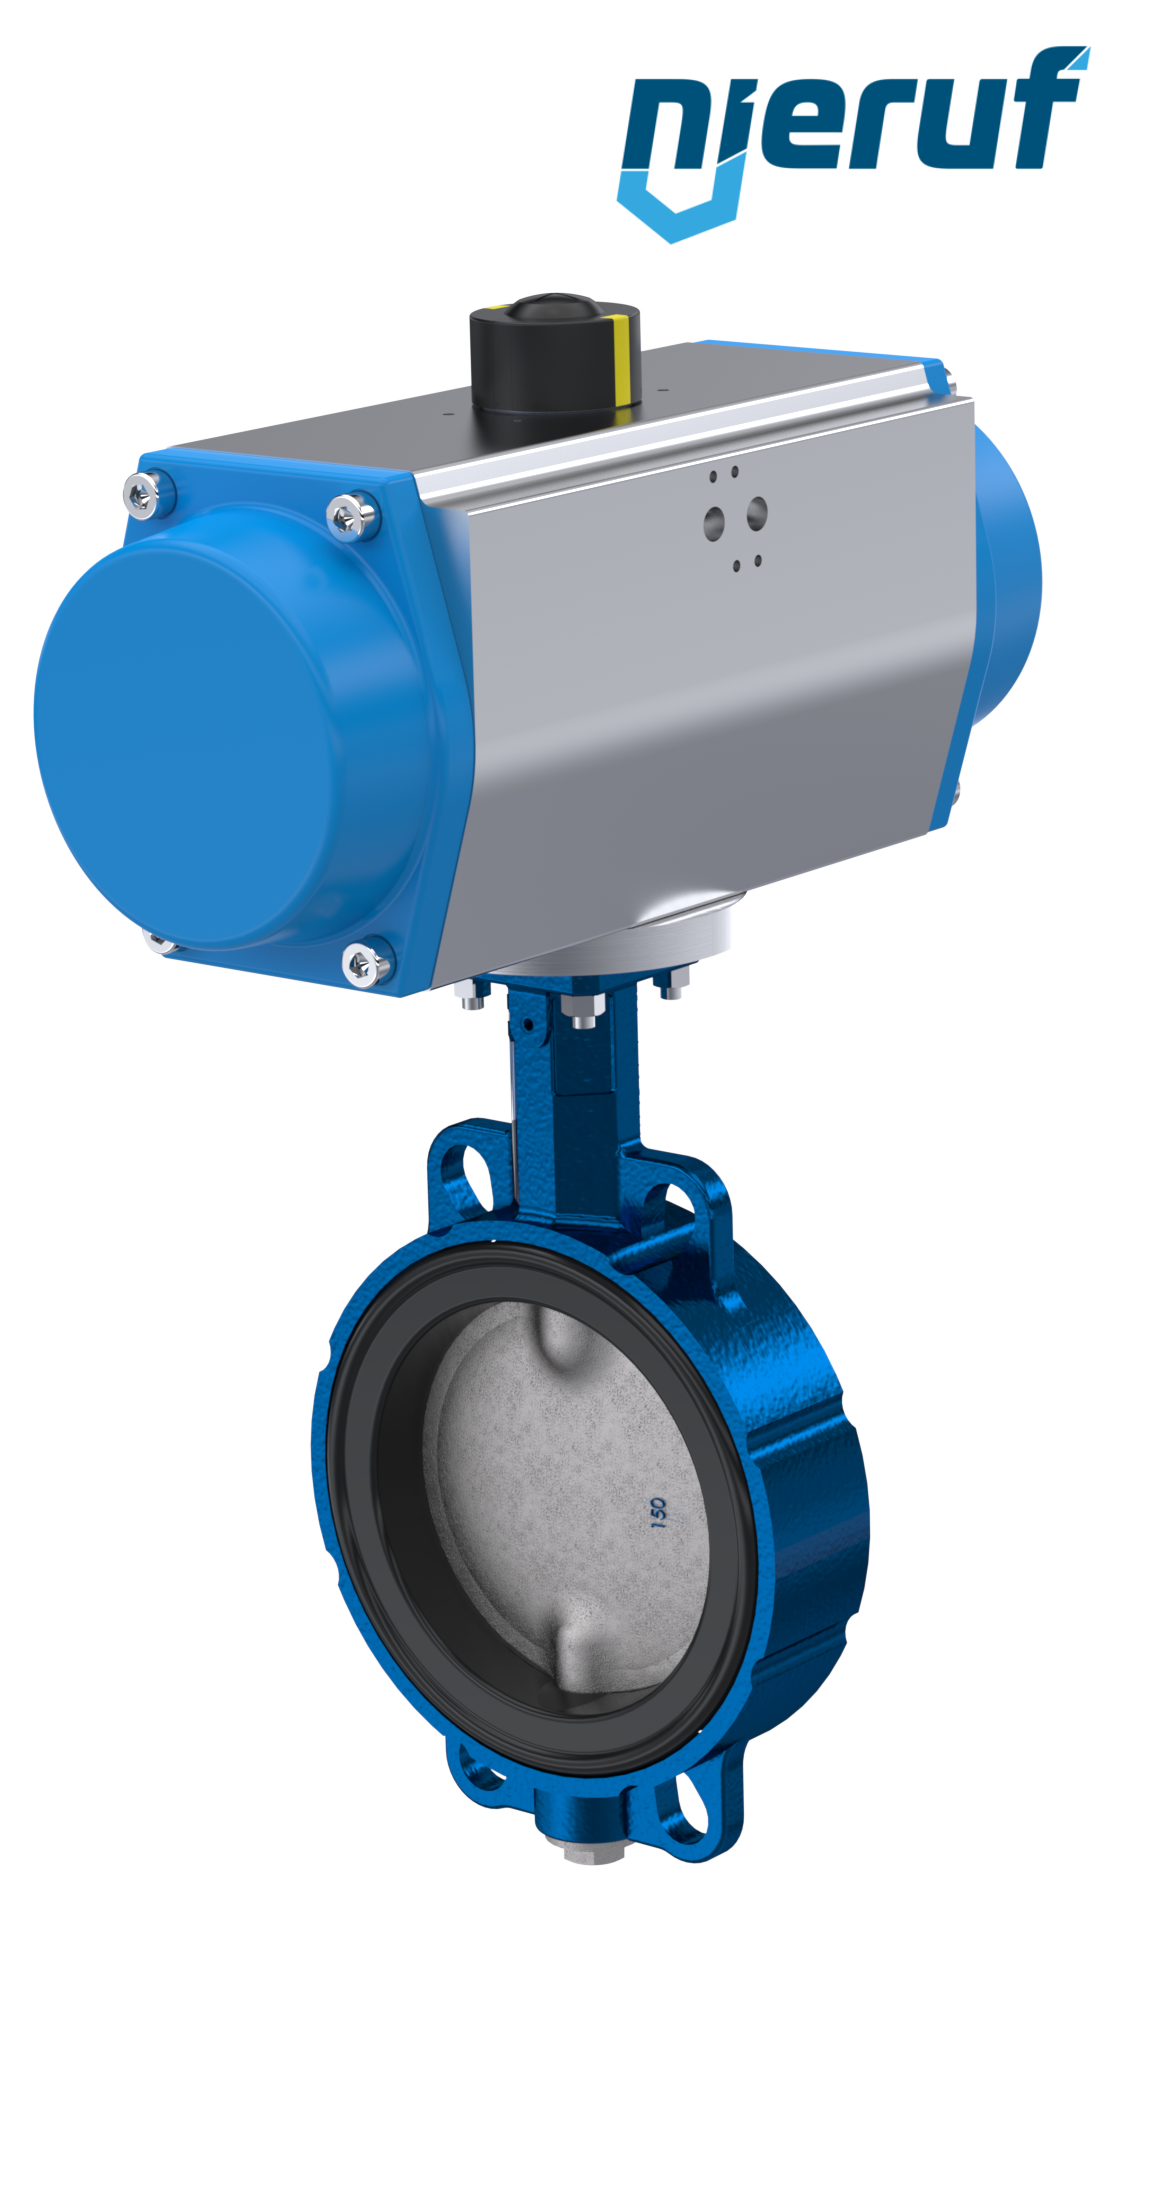 Butterfly valve DN 100 AK01 EPDM DVGW drinking water, WRAS, ACS, W270 pneumatic actuator single acting